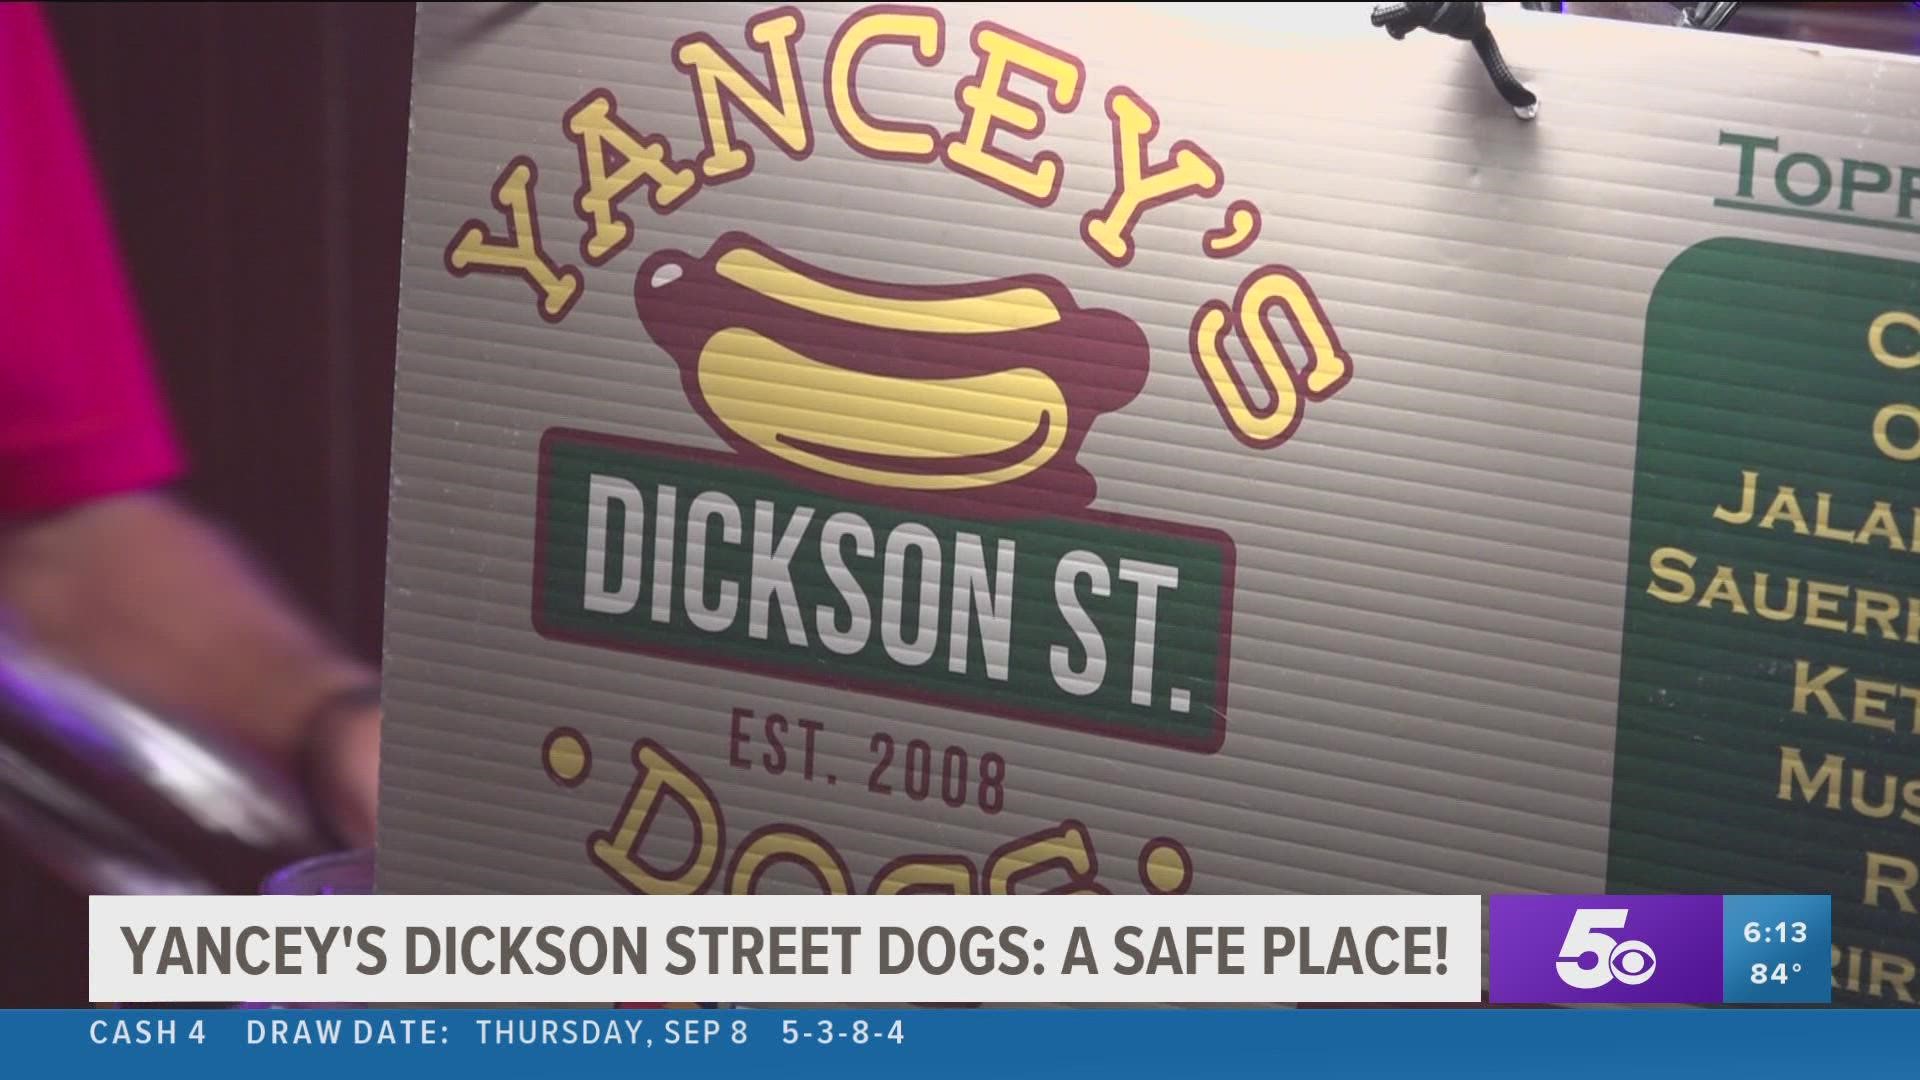 Yancey's Dickson Street Dogs's owner Cody Yancey says he is on a mission to serve great foods with creating a safe place in Fayetteville's entertainment district.